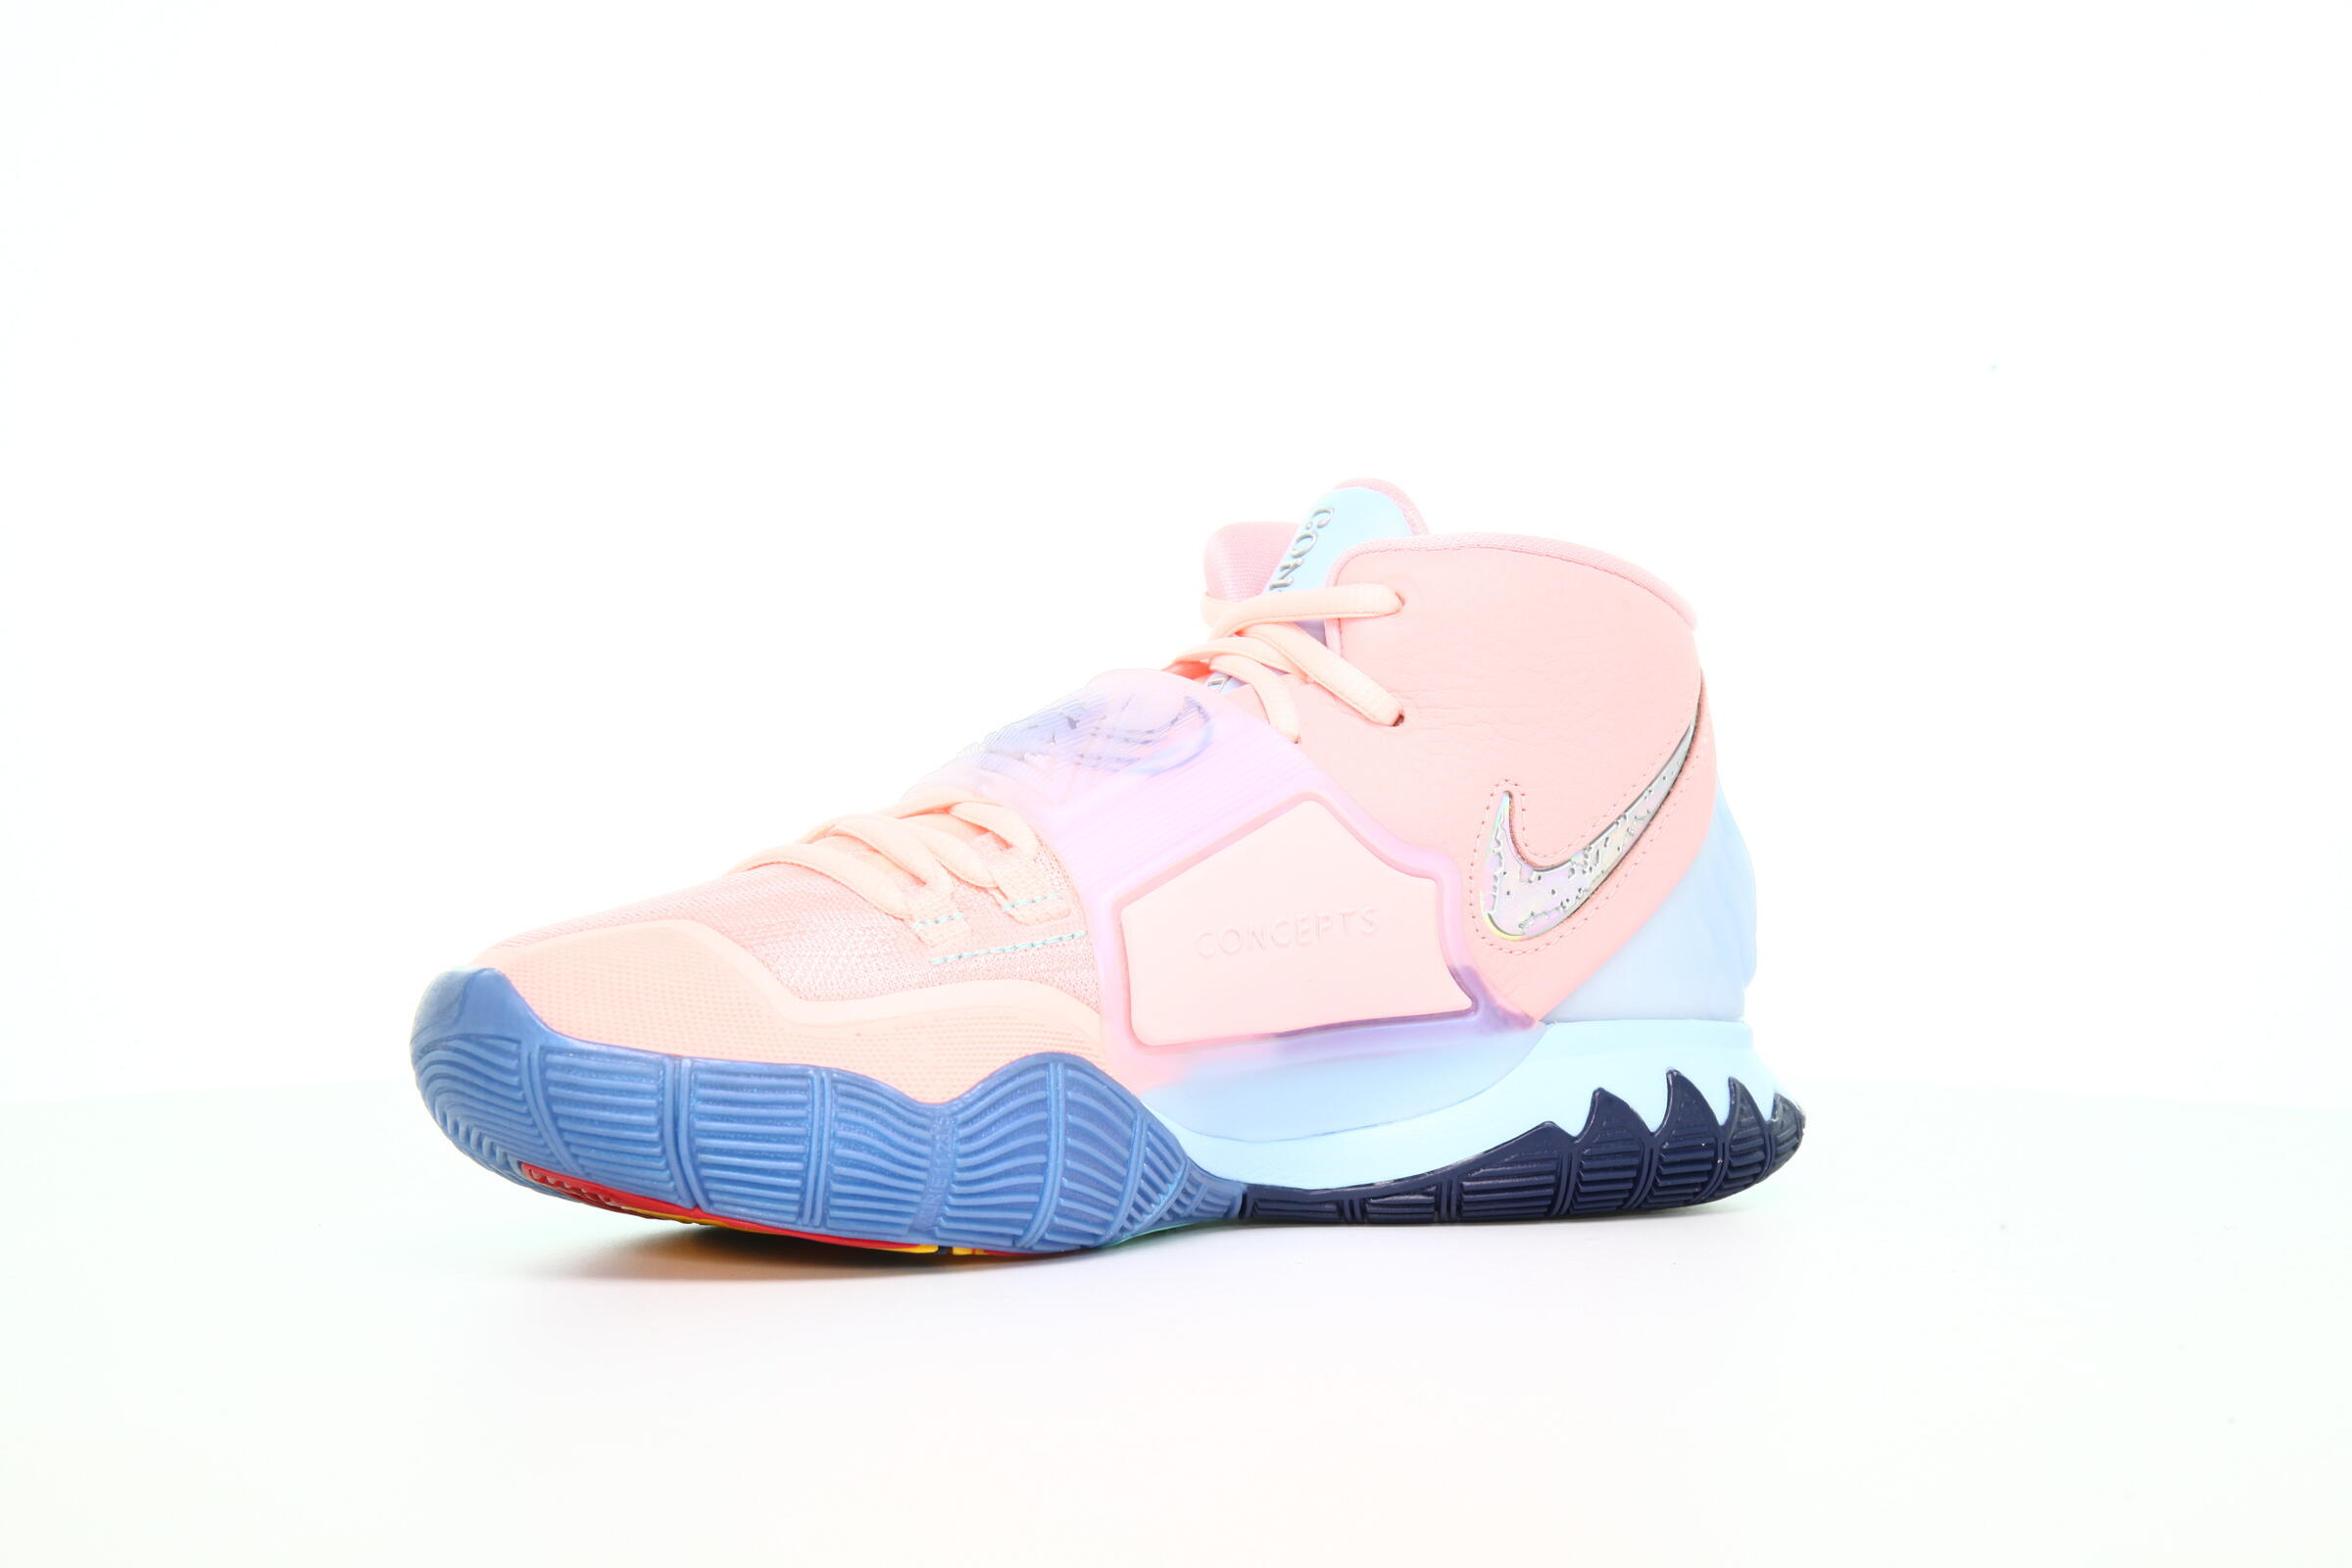 Nike x Concepts Kyrie 6  "Pink Tint"